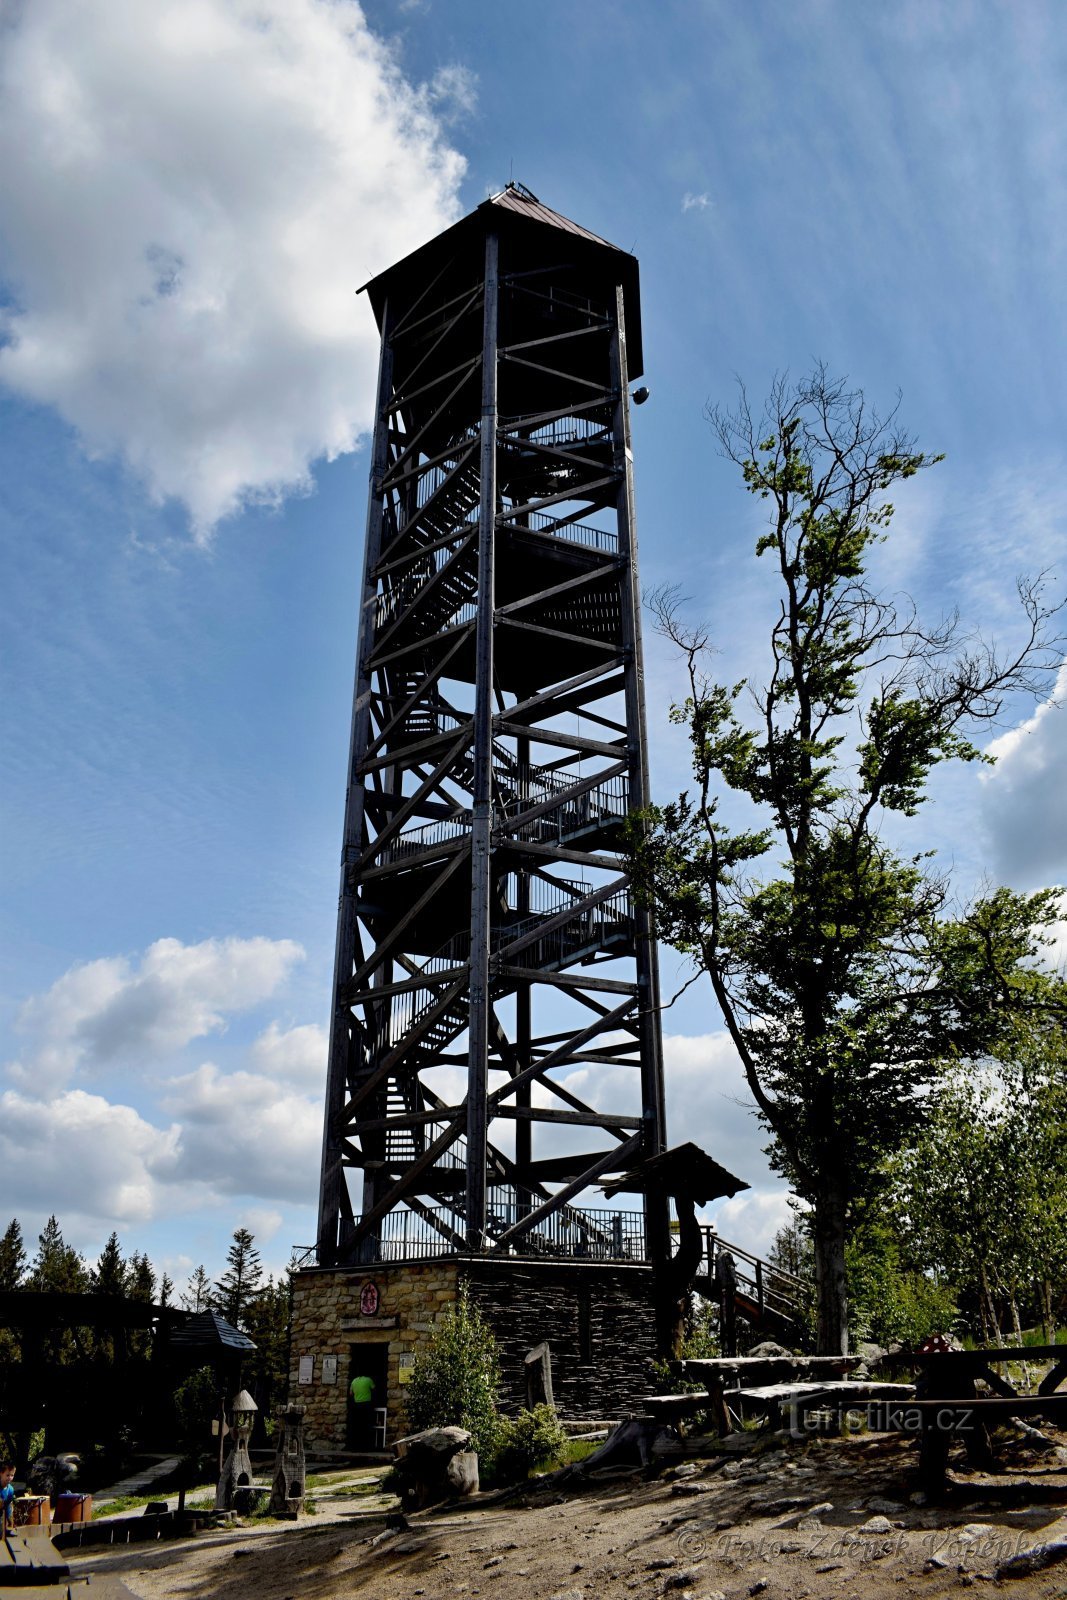 Lookout tower on Havel mountain.